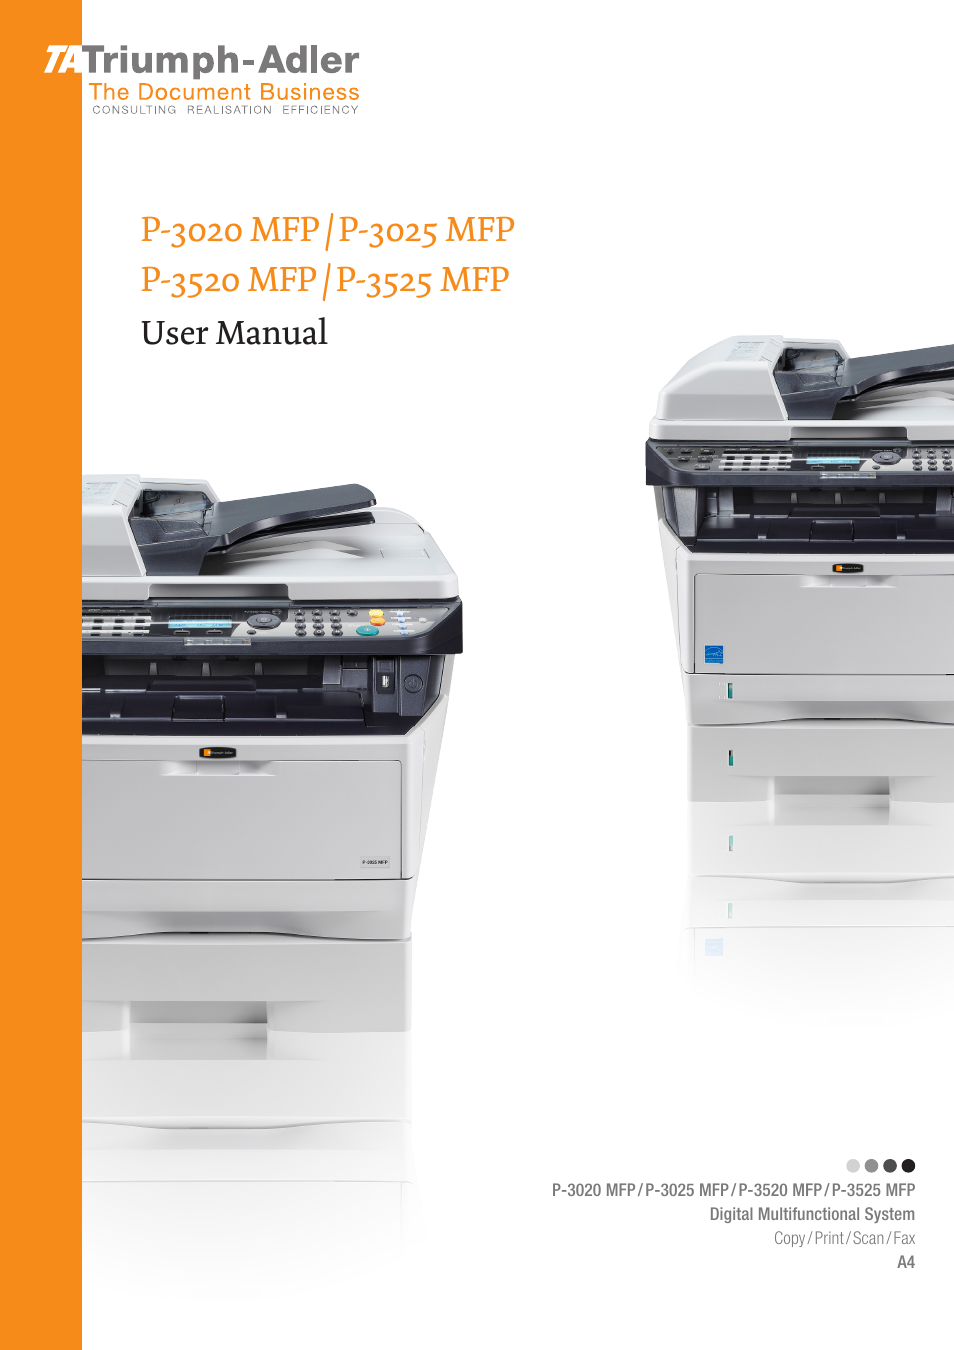 TA Triumph-Adler P-3020 MFP User Manual | 481 pages | Also for: P-3025 MFP,  P-3520 MFP, P-3525 MFP, DC 6130, DC 6130P, DC 6135, DC 6230, DC 6235, DC  2340, DC 2440,